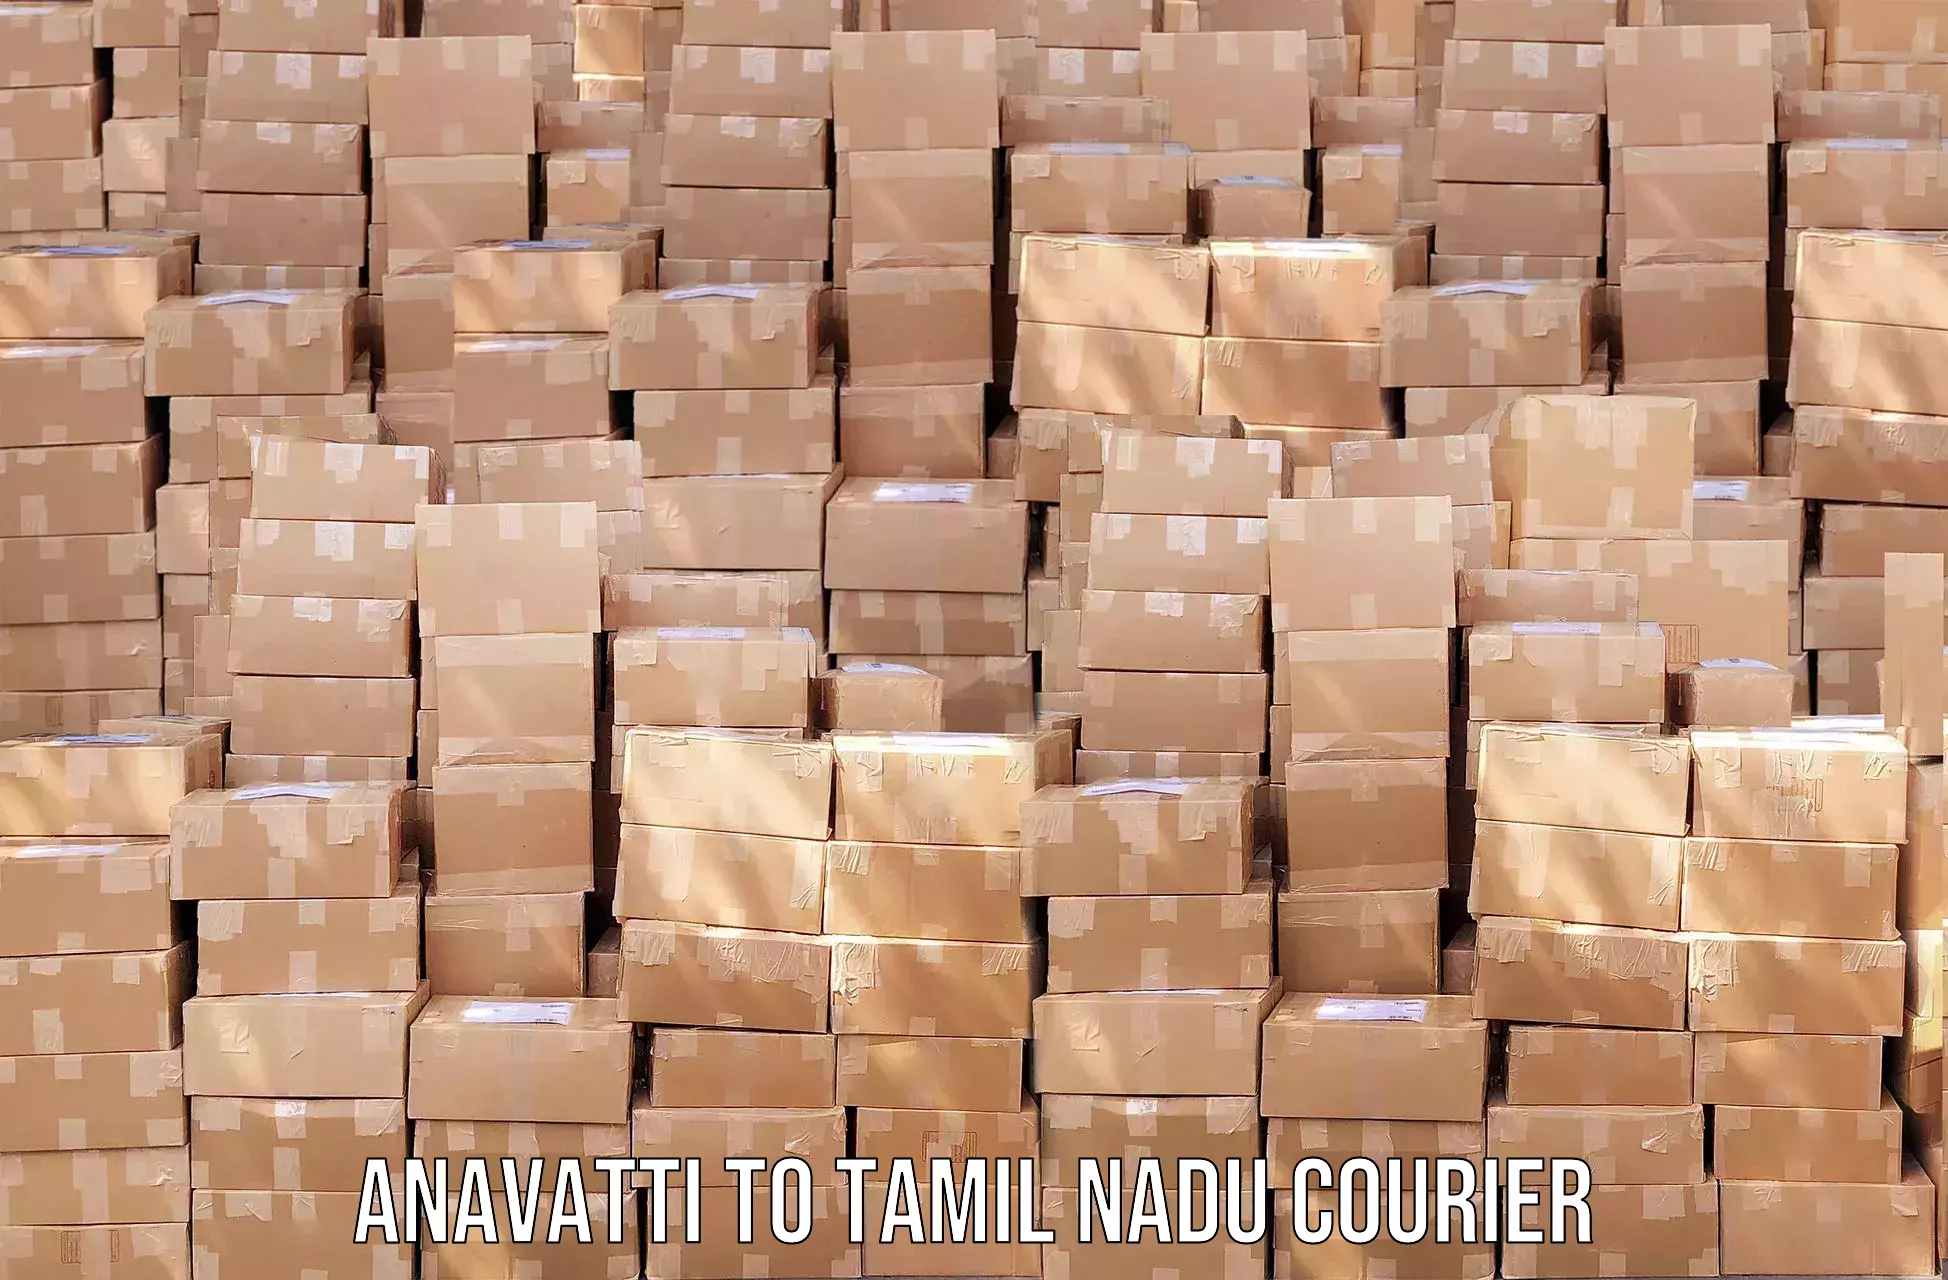 Sustainable courier practices Anavatti to Tamil Nadu